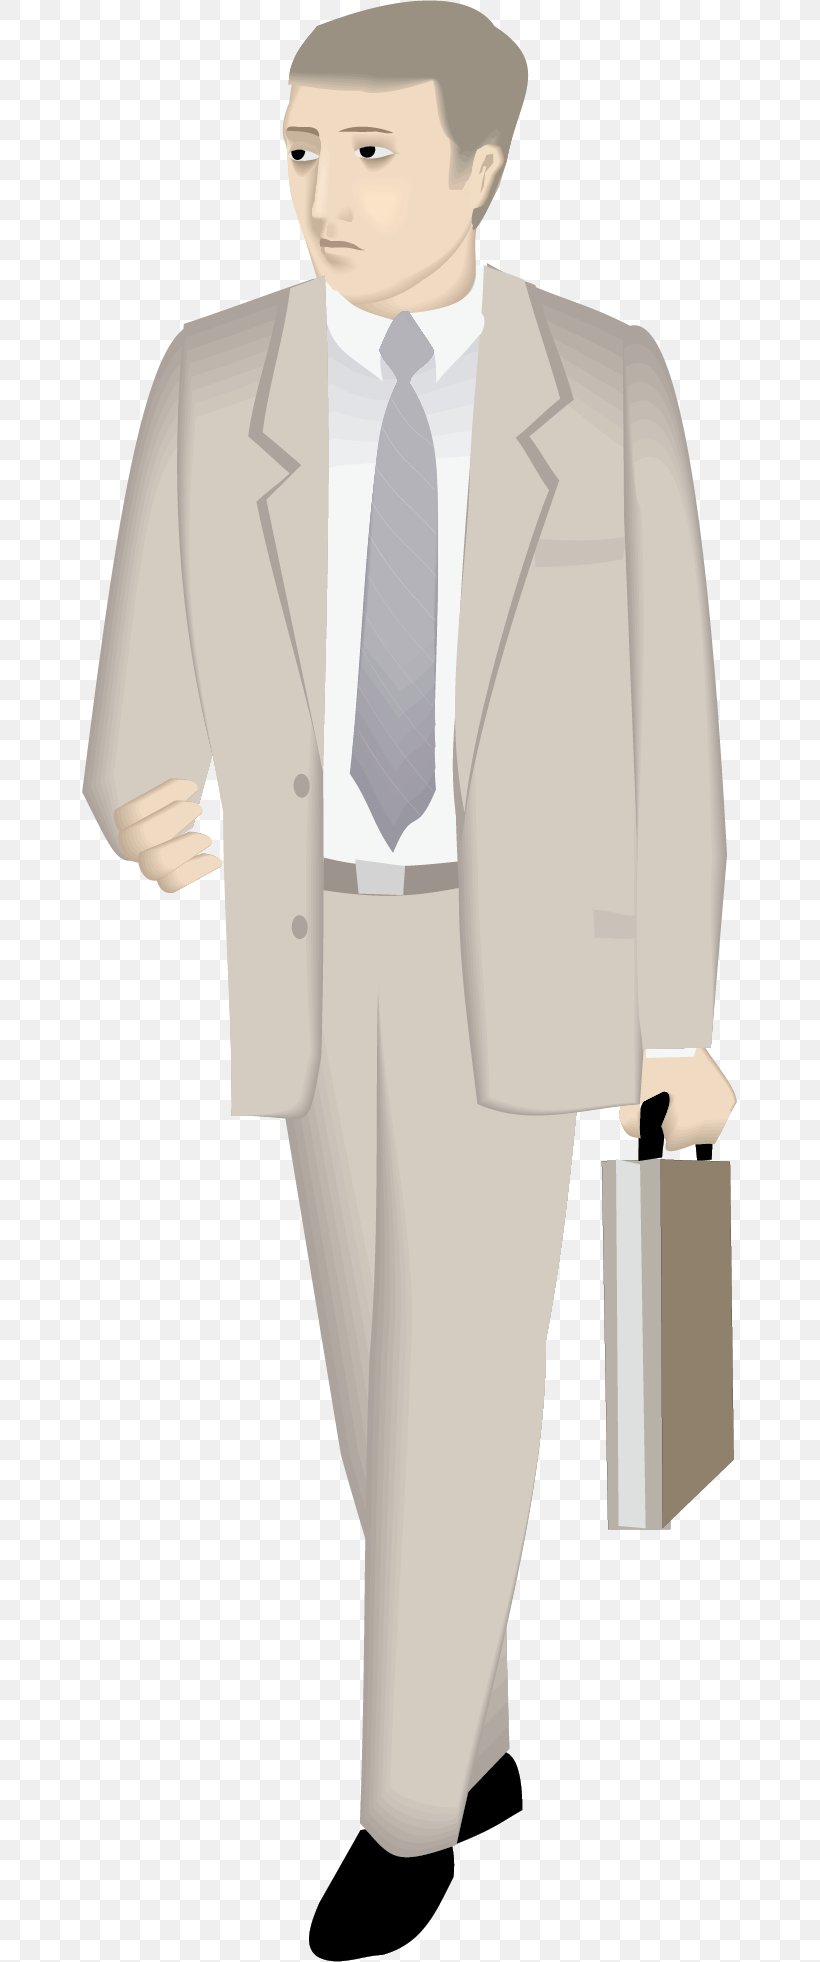 Sadness Les Hommes Tristes Man, PNG, 655x1962px, Sadness, Businessperson, Formal Wear, Gentleman, Irritability Download Free